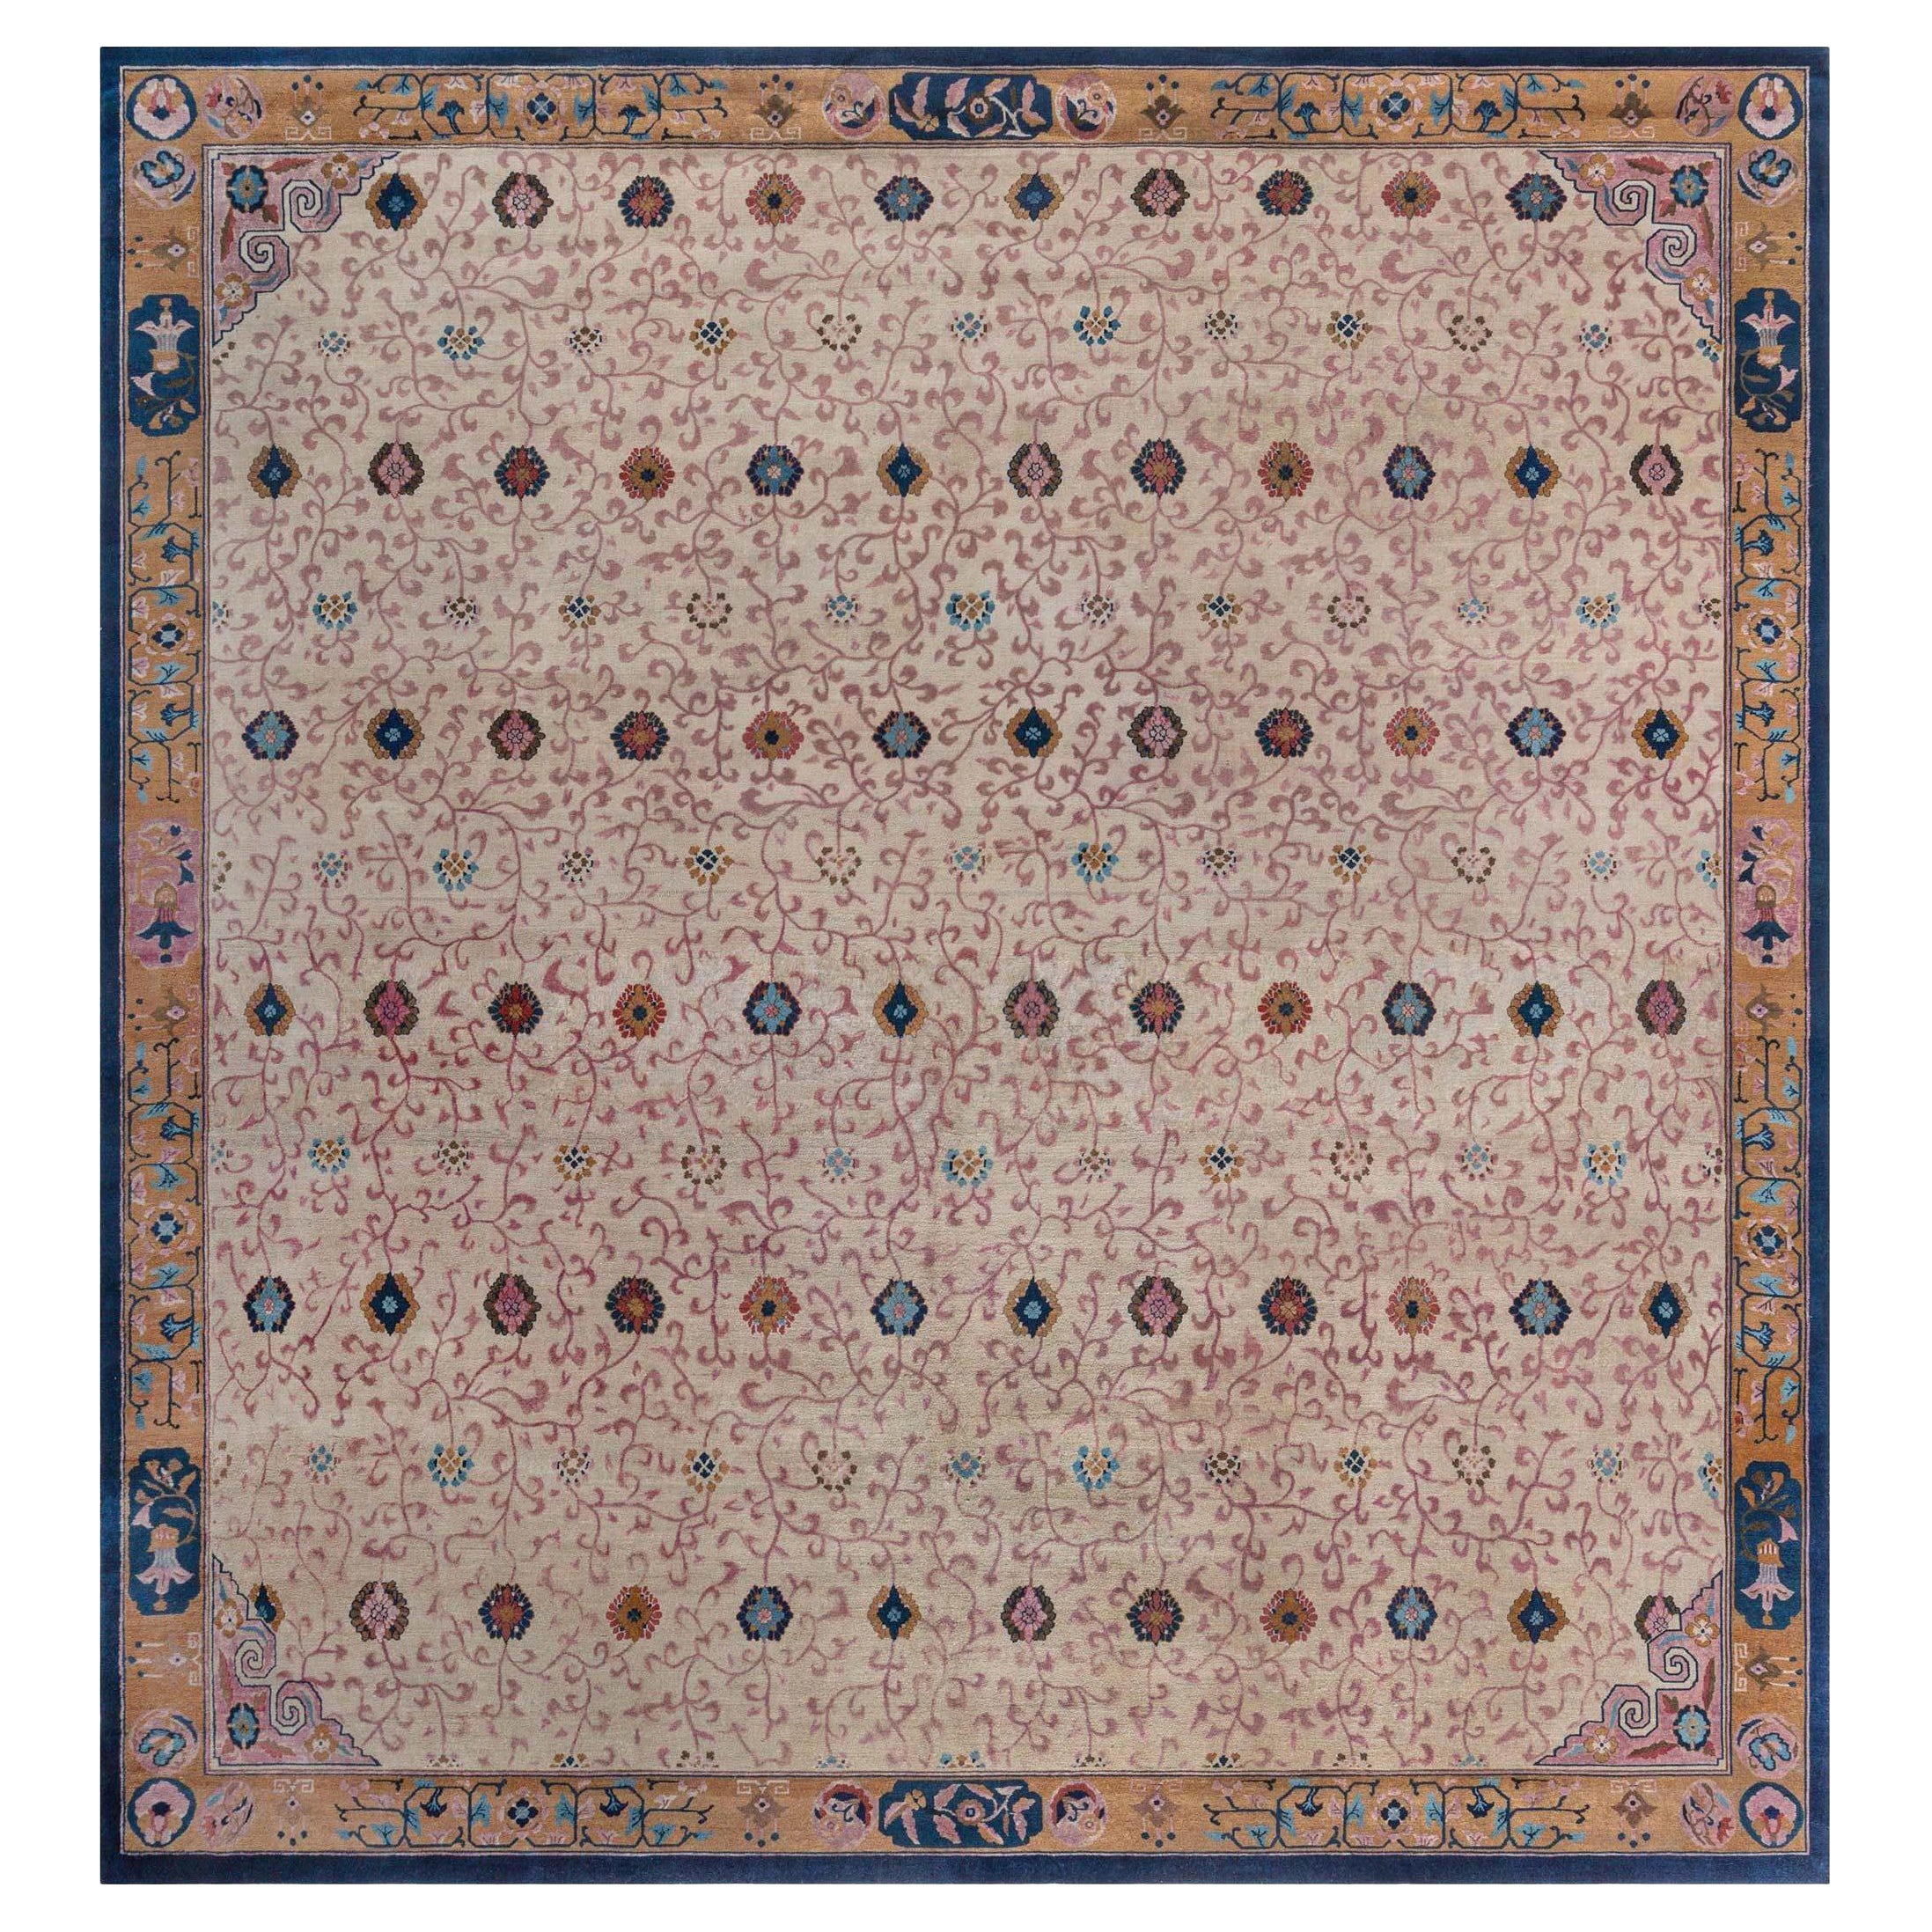 Antique Chinese Rug Size Adjusted